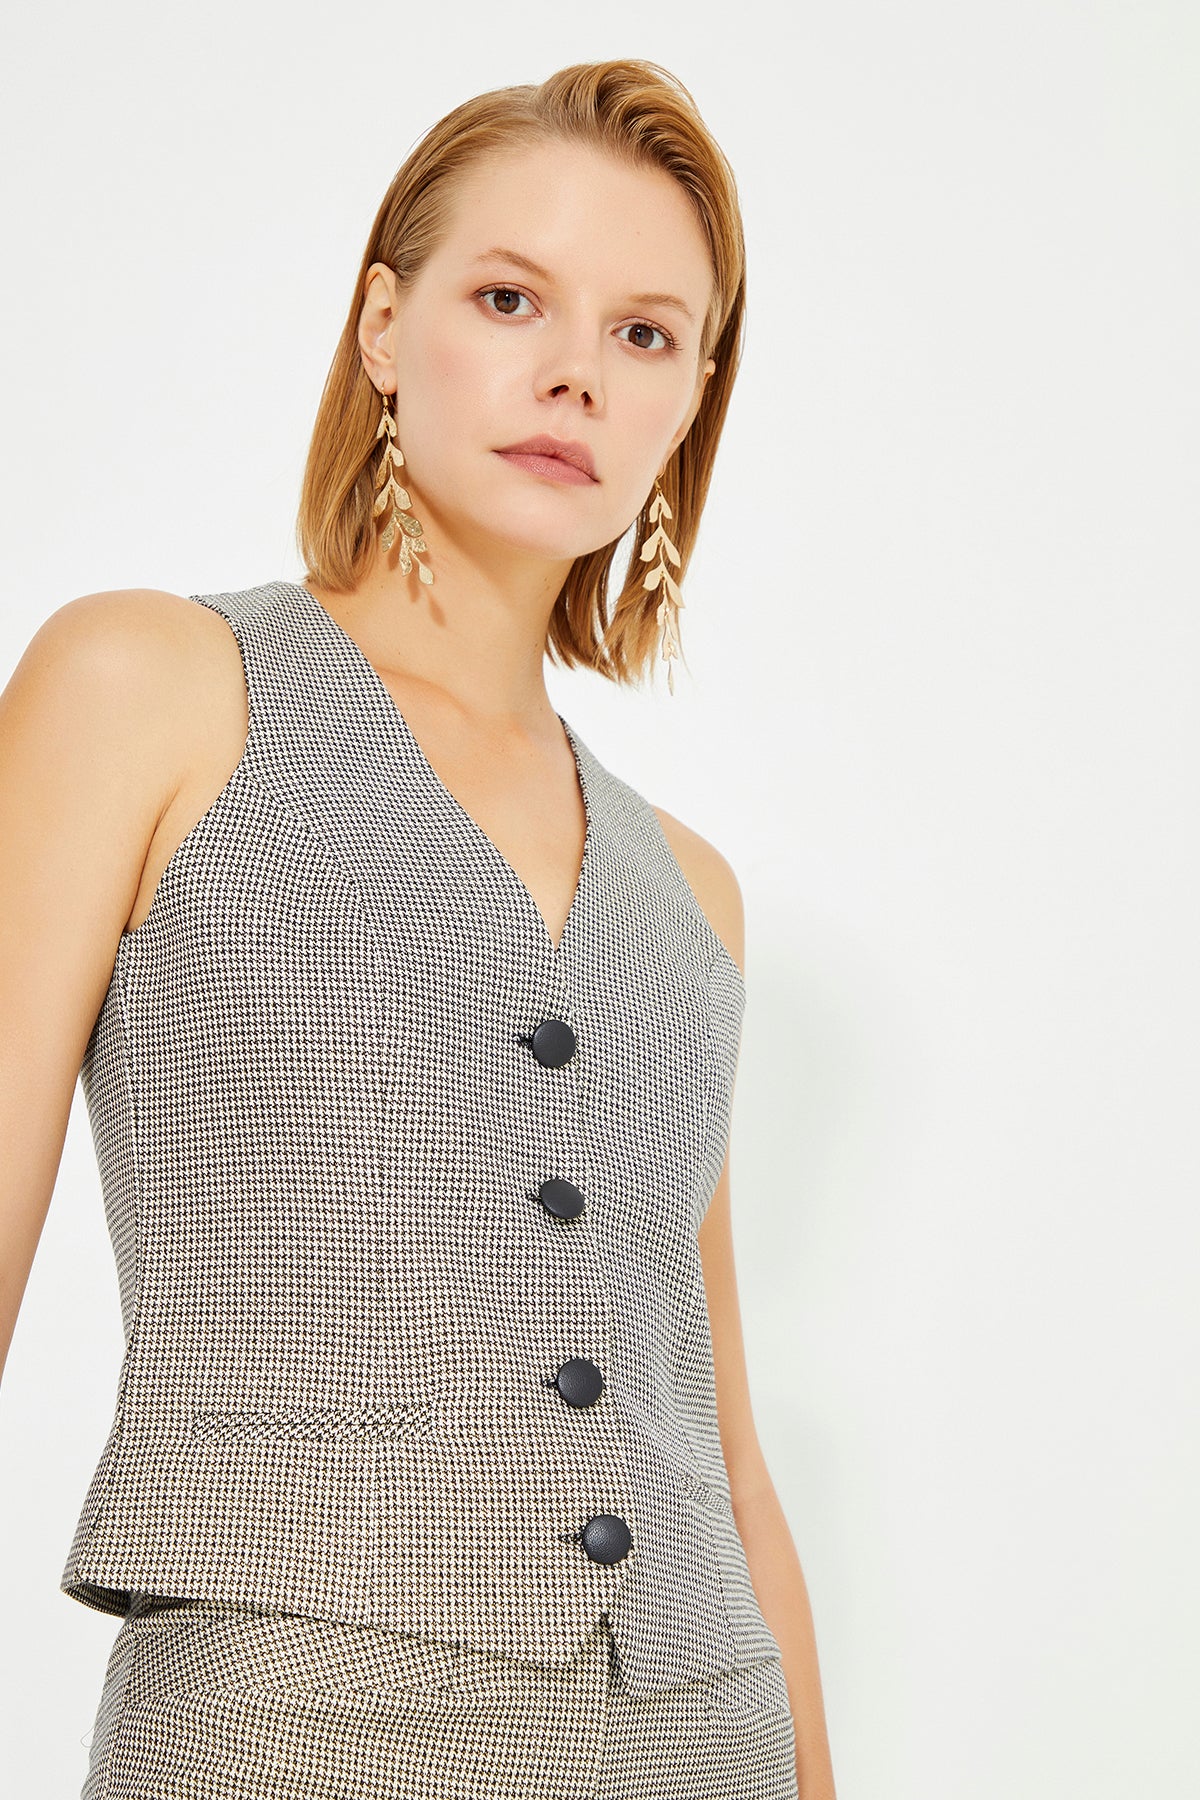 Houndstooth Patterned Front Button Closure Lined Women's Vest